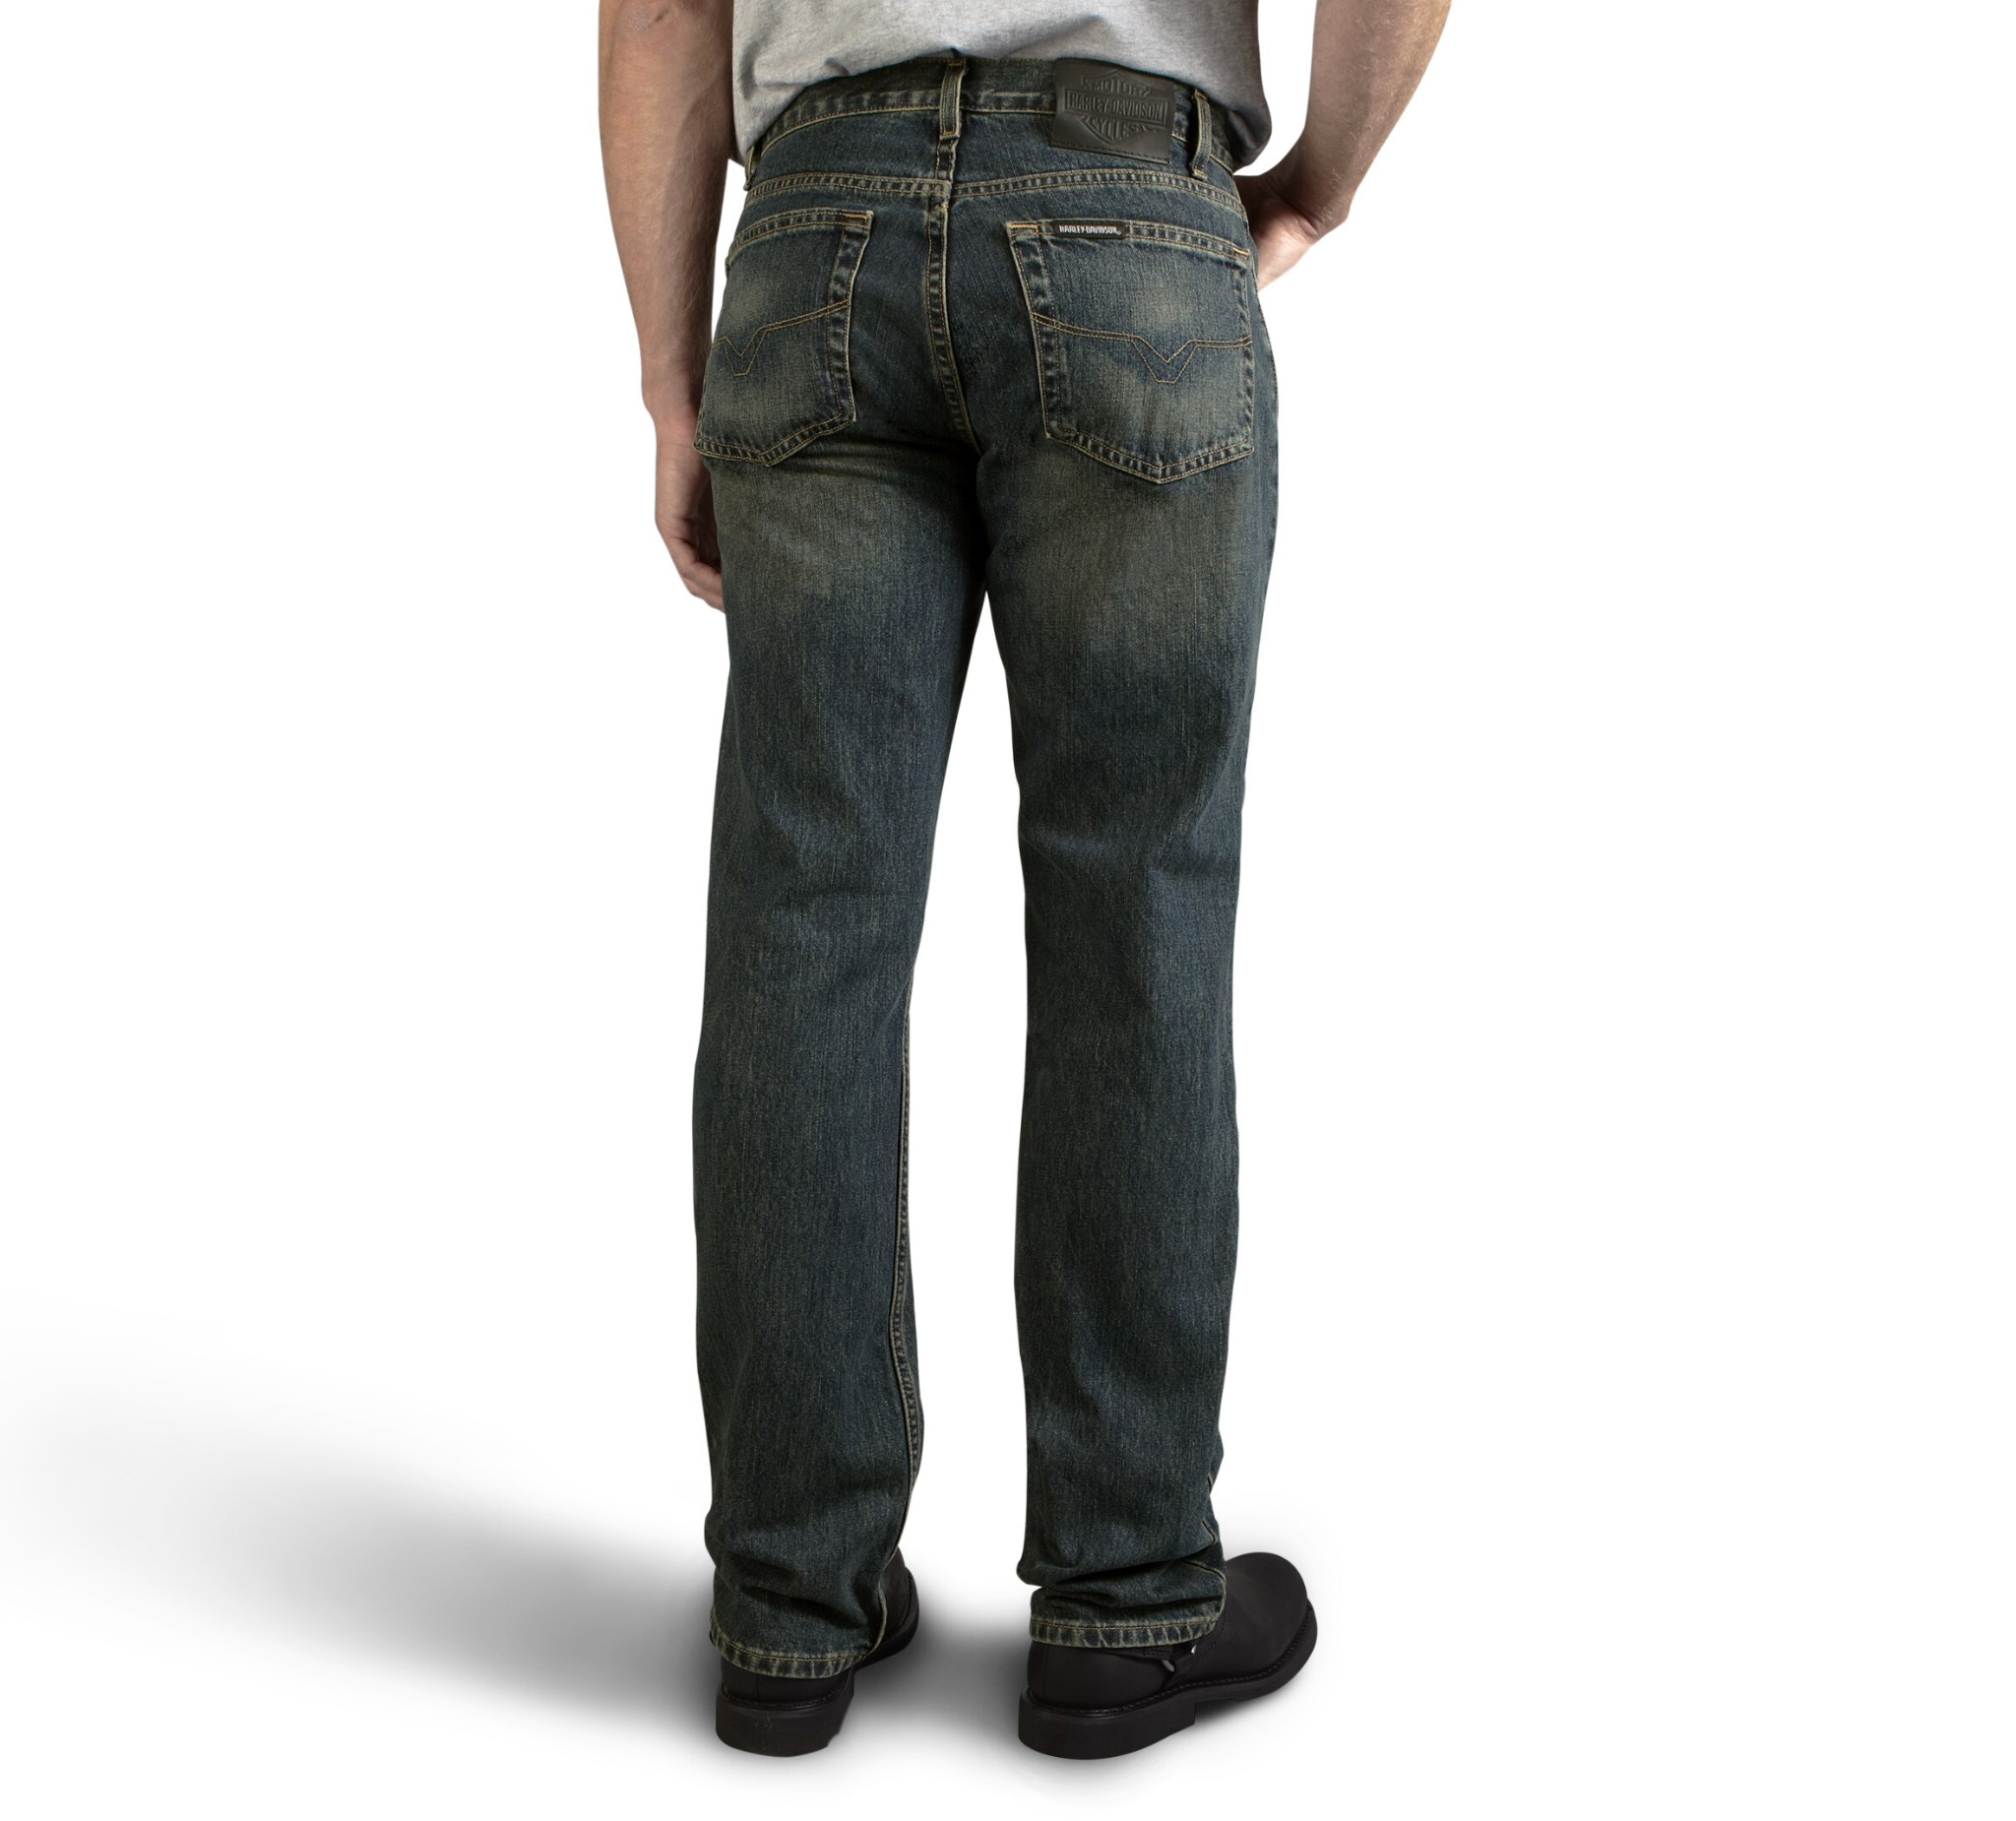 Men's Classic Bootcut Jeans - Washed Blue | Harley-Davidson USA